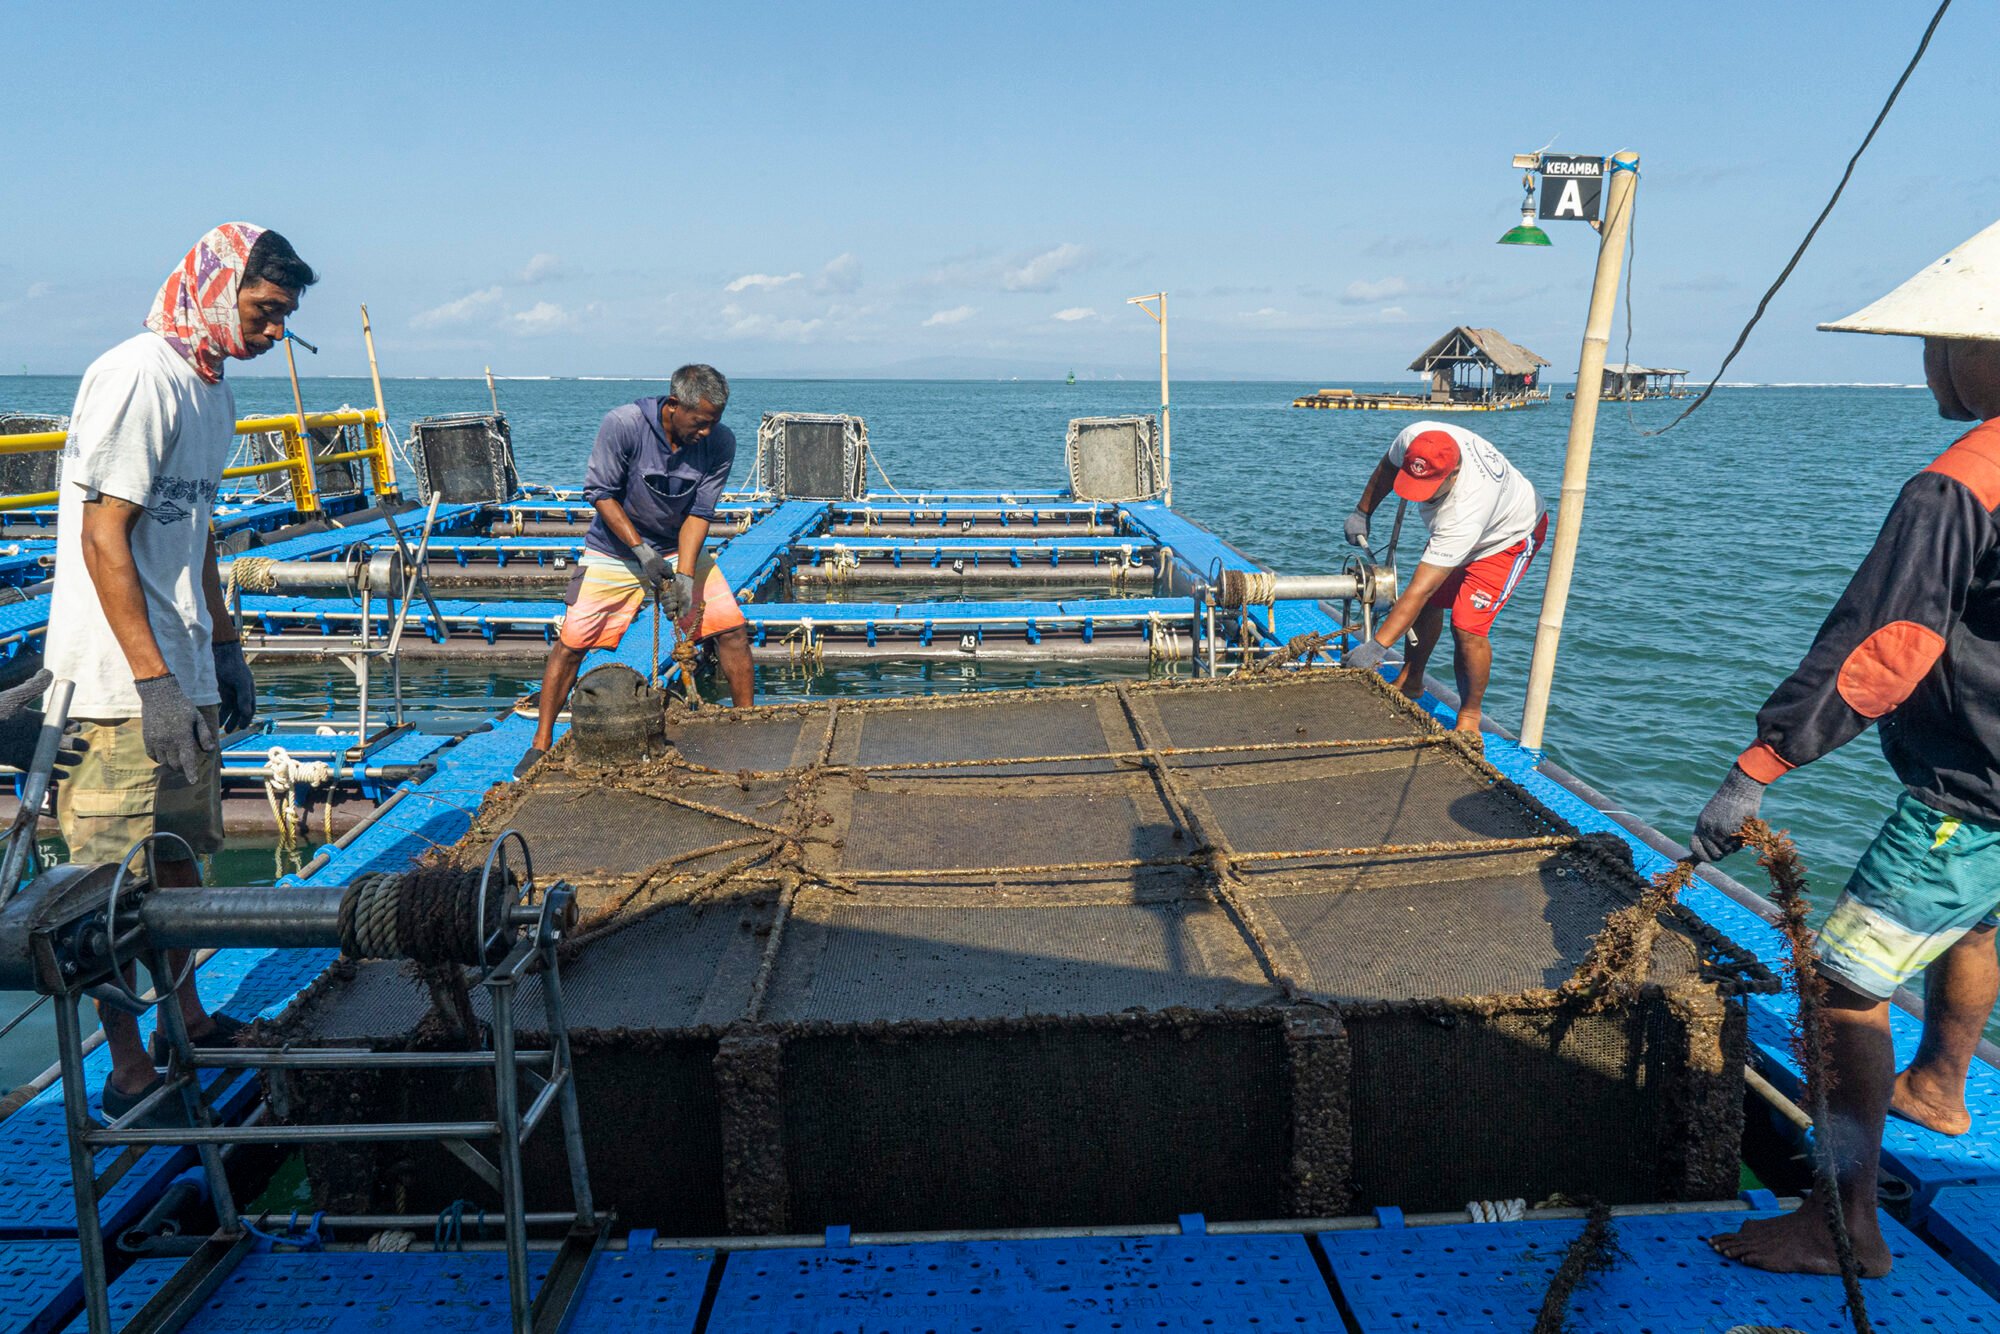 Indonesia fisheries: Workers on a floating farm near the village of Serangan in Bali winch up a lobster cage for cleaning and feeding